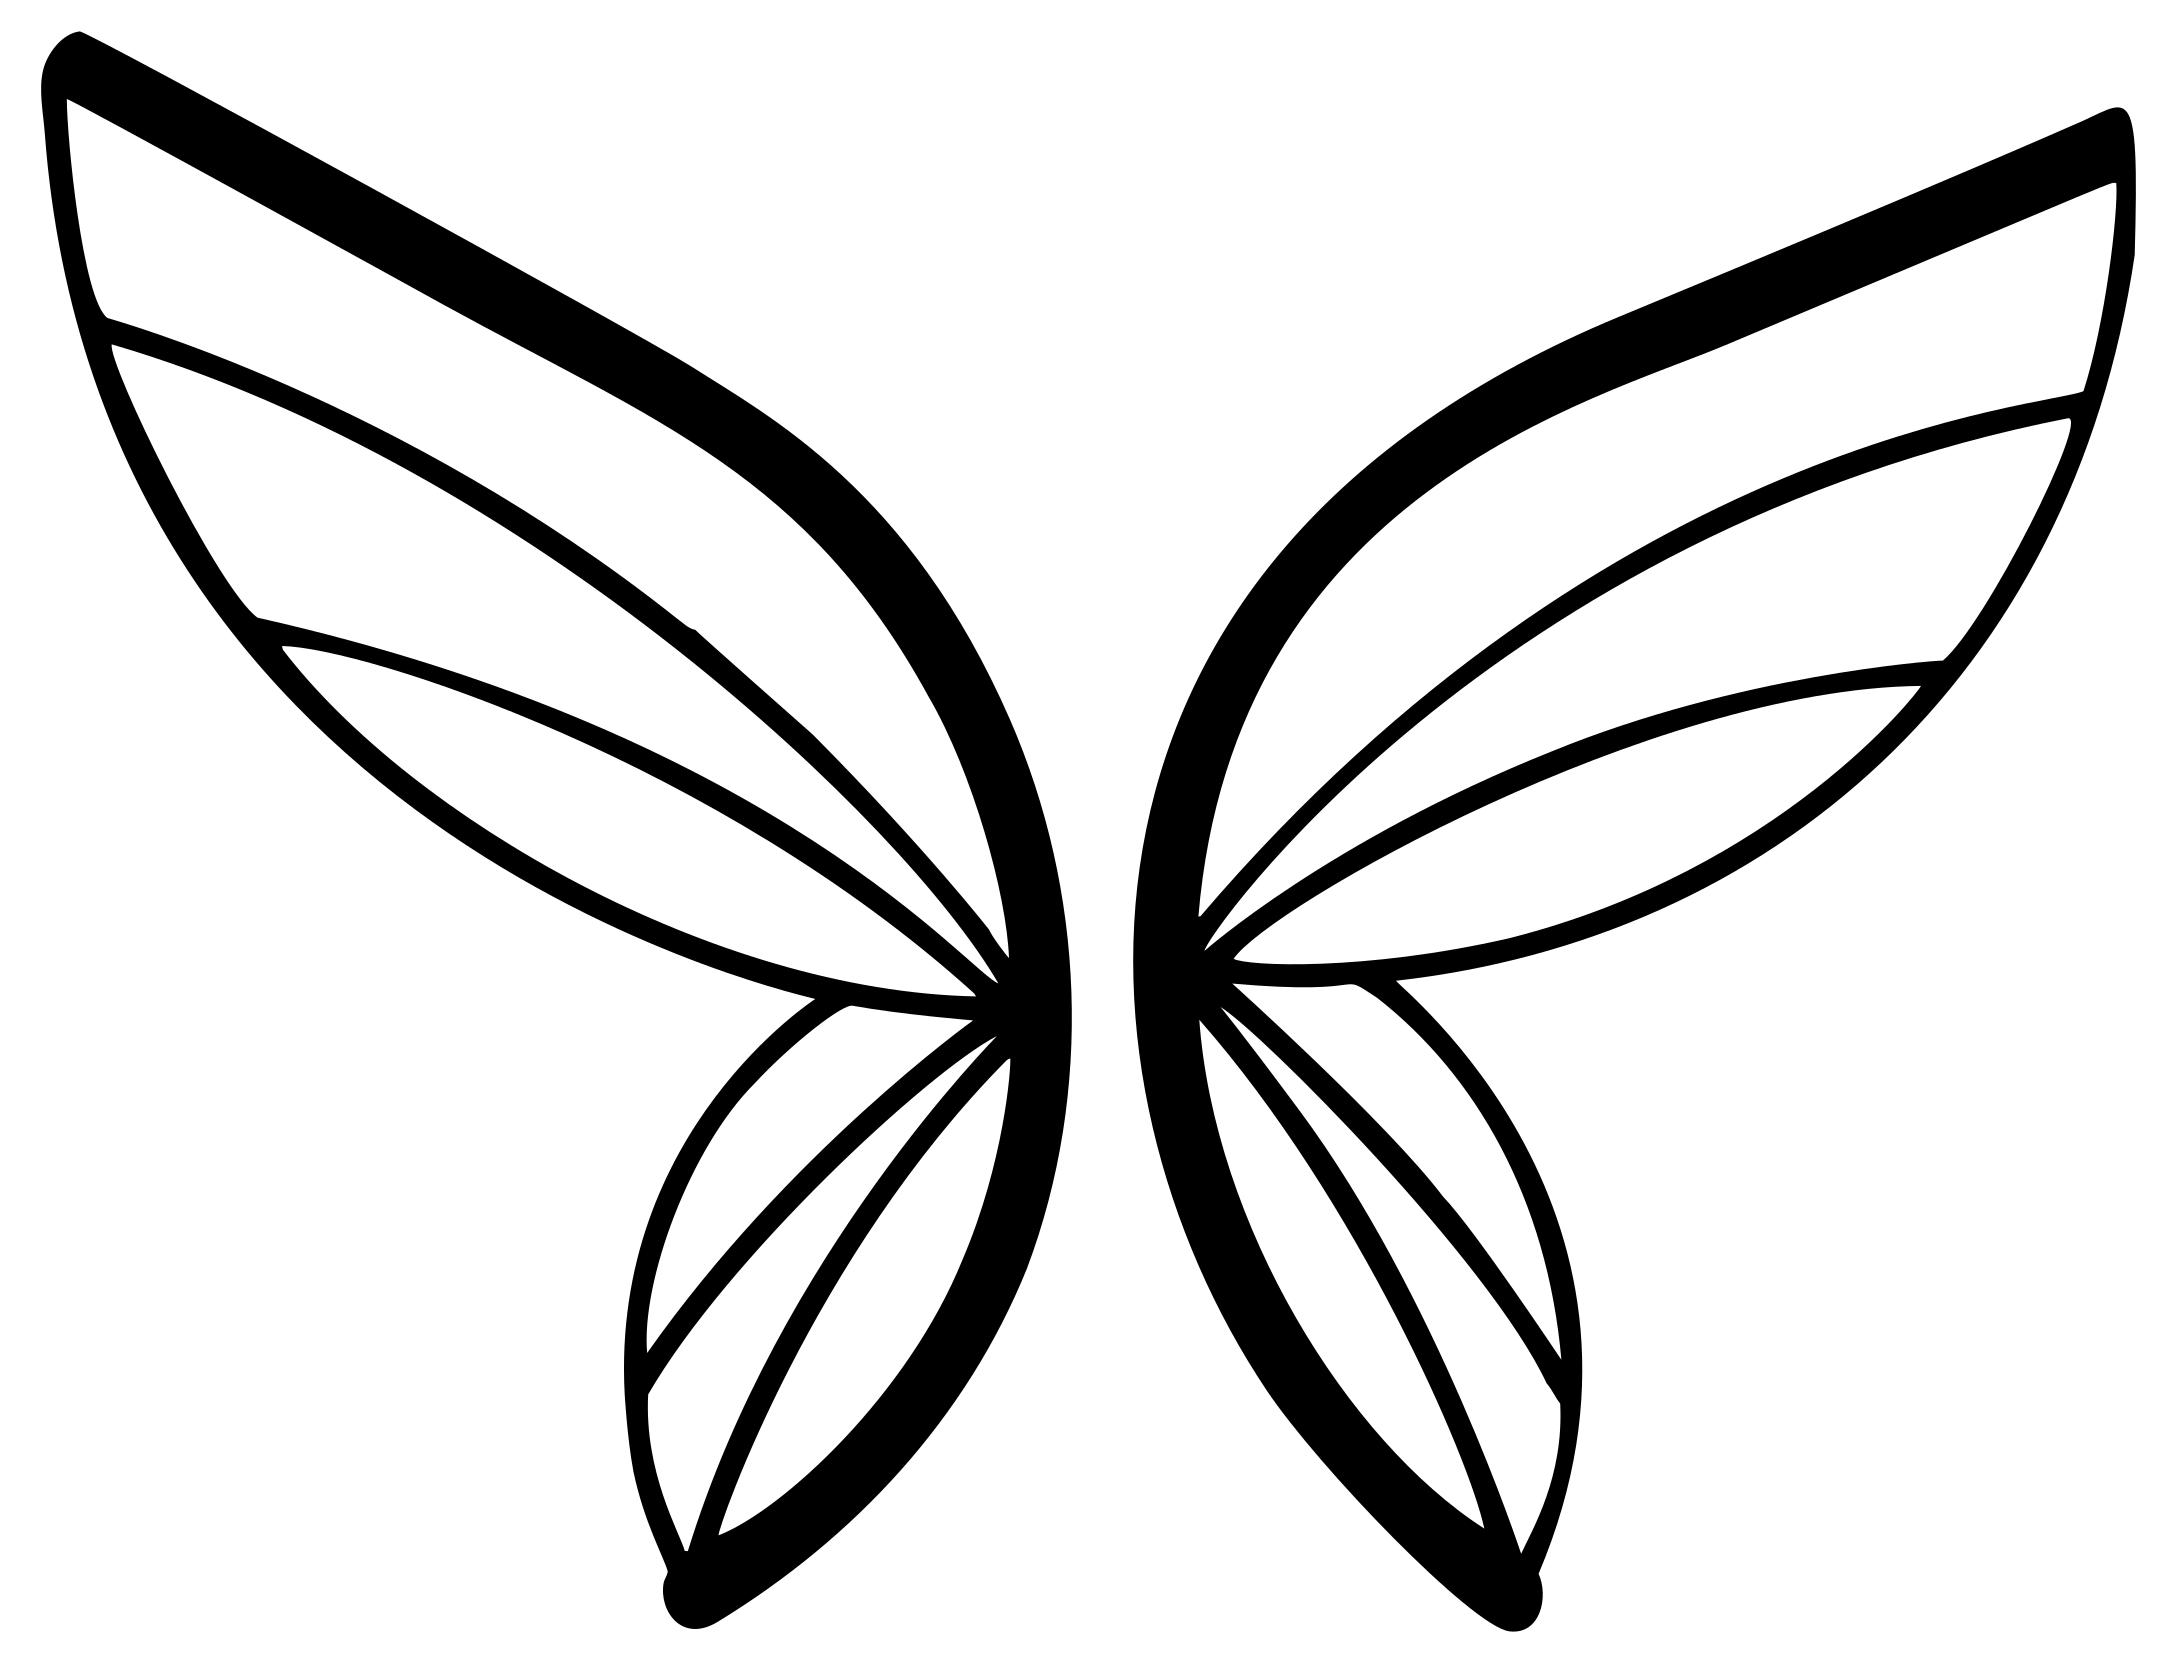 Abstract Butterfly Silhouette 2 Clipart - Design Droide